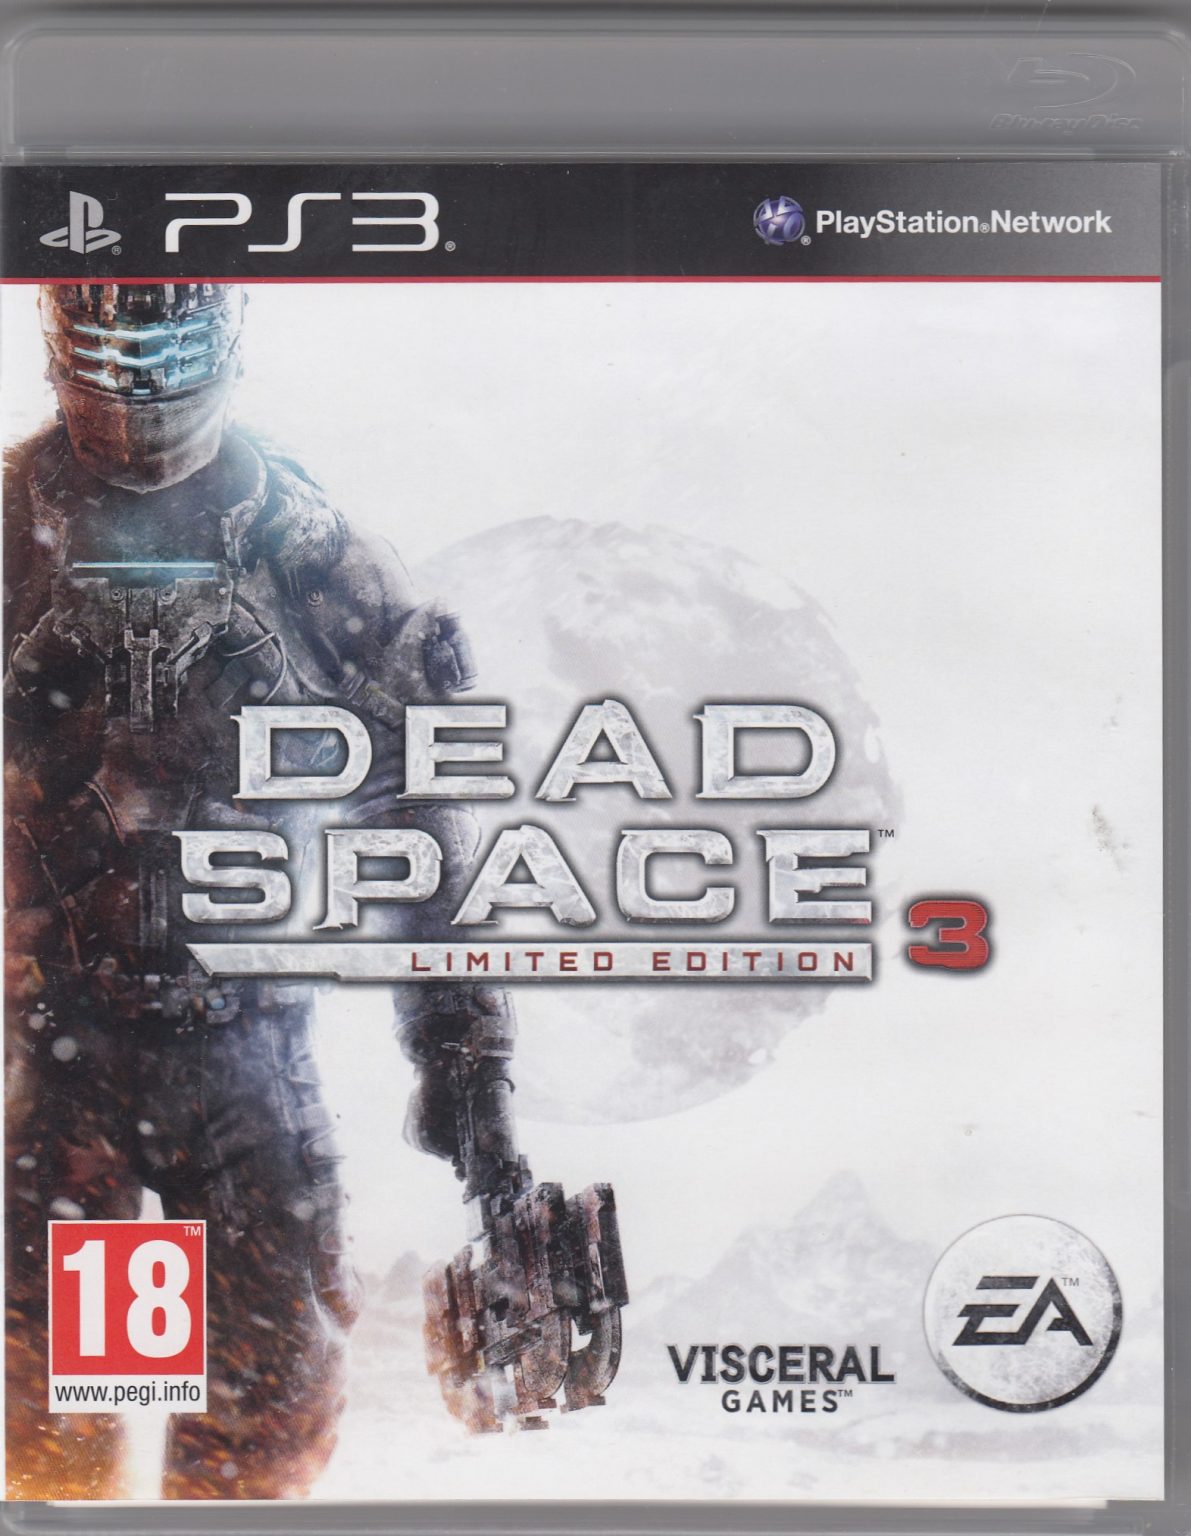 dead space 3 limited edition 3 disc